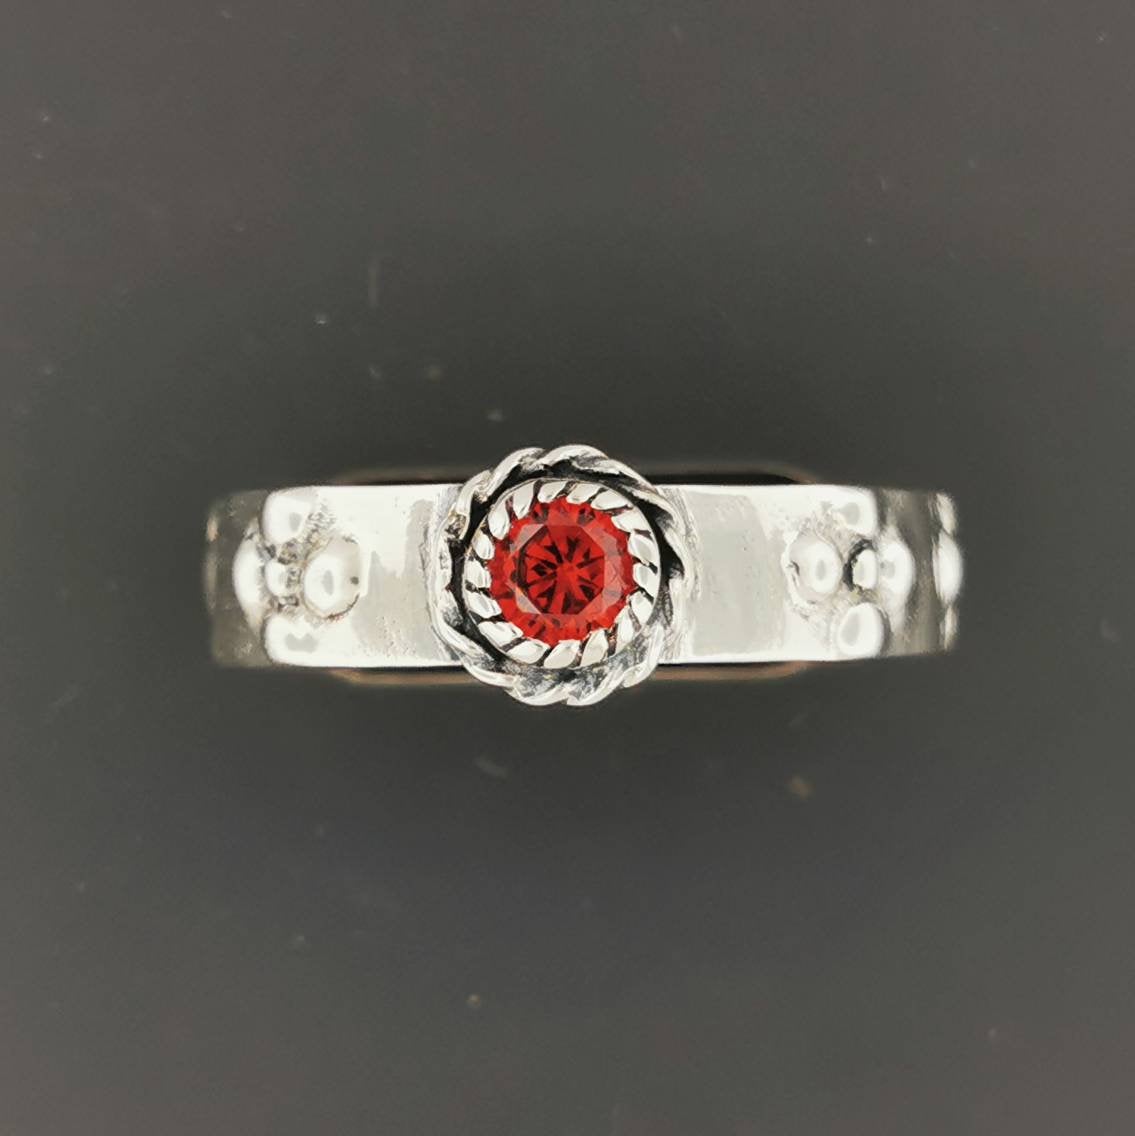 Howls Calcifer Fire Ring in Sterling Silver with Imitation Birthstone, Howls Moving Castle Ring, Howl and Sophie Rings, Birthstone Howls Calcifer Fire Band in Sterling Silver, Howls Moving Castle Engagement Ring, Silver Birthstone Ring